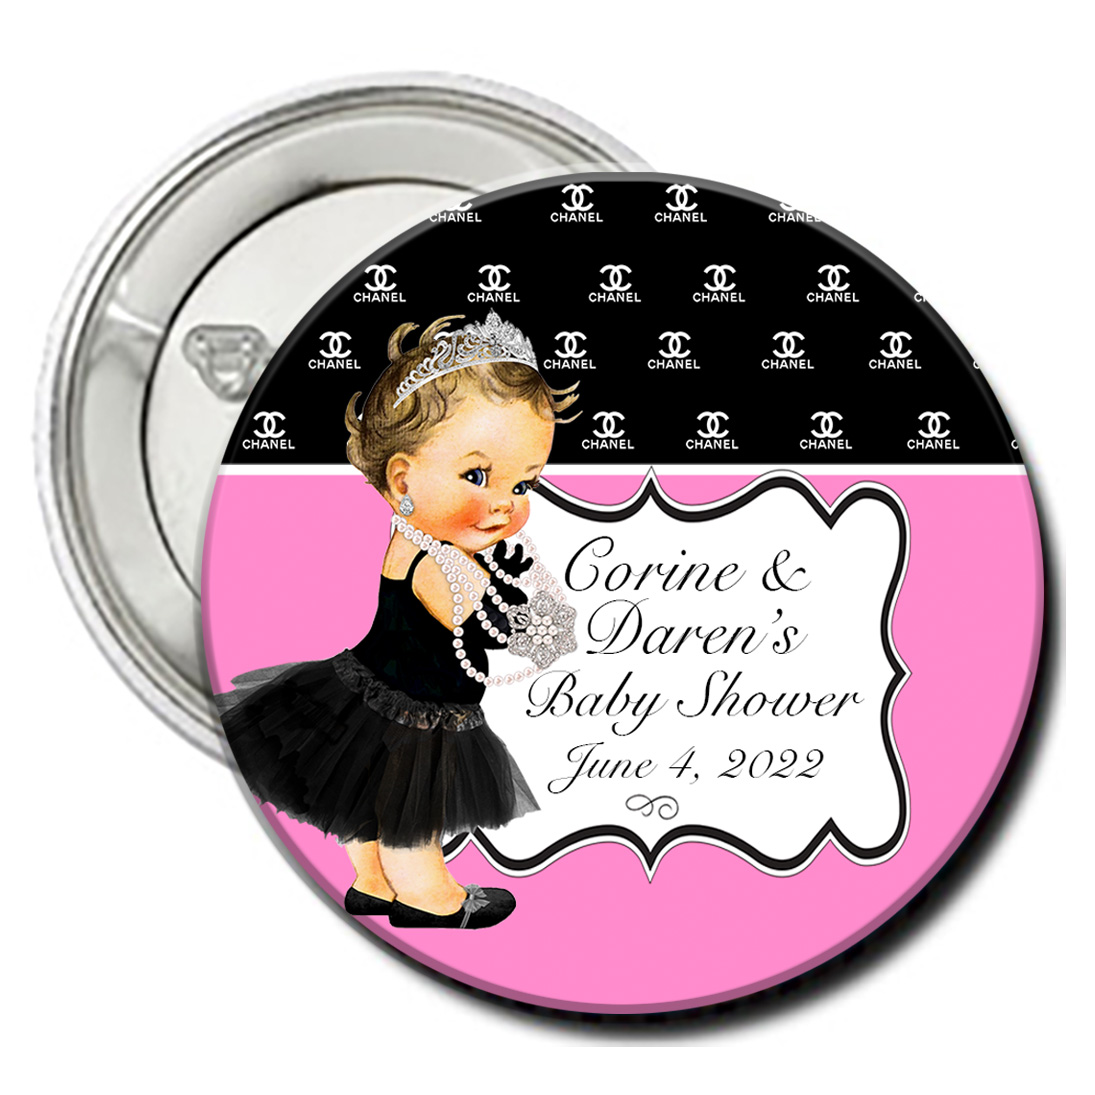 Chanel baby shower button on Party NY